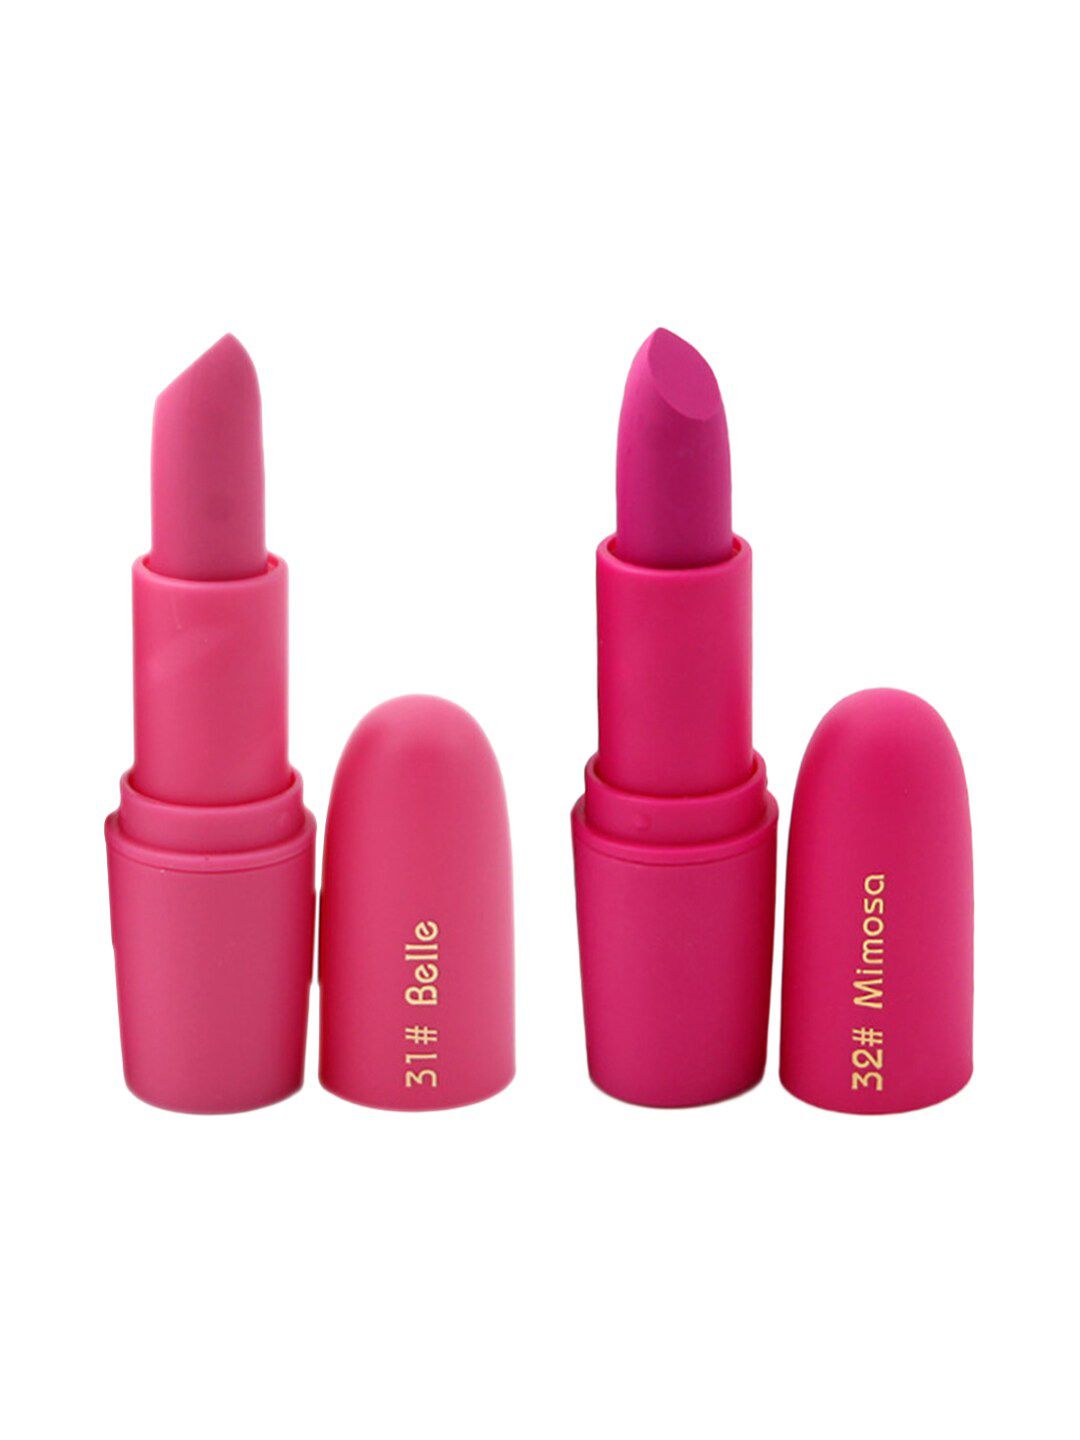 MISS ROSE Professional Make-Up Set of 2 Matte Creamy Lipsticks - Belle 31 & Mimosa 32 Price in India